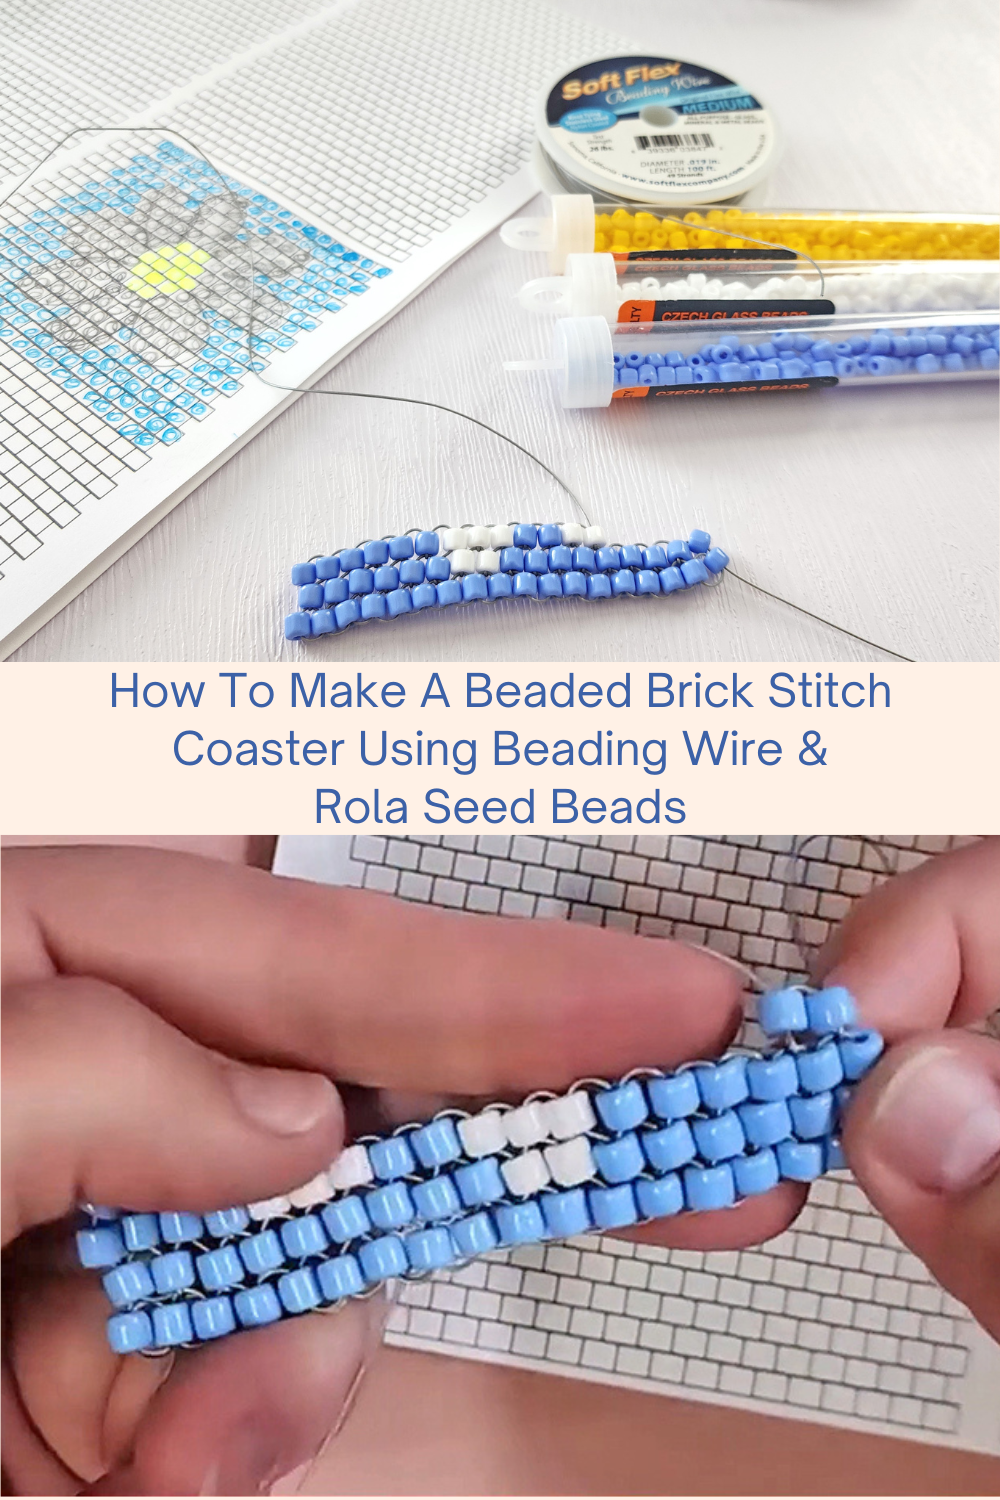 How To Make A Beaded Brick Stitch Coaster Using Beading Wire & Rola Seed Beads Collage